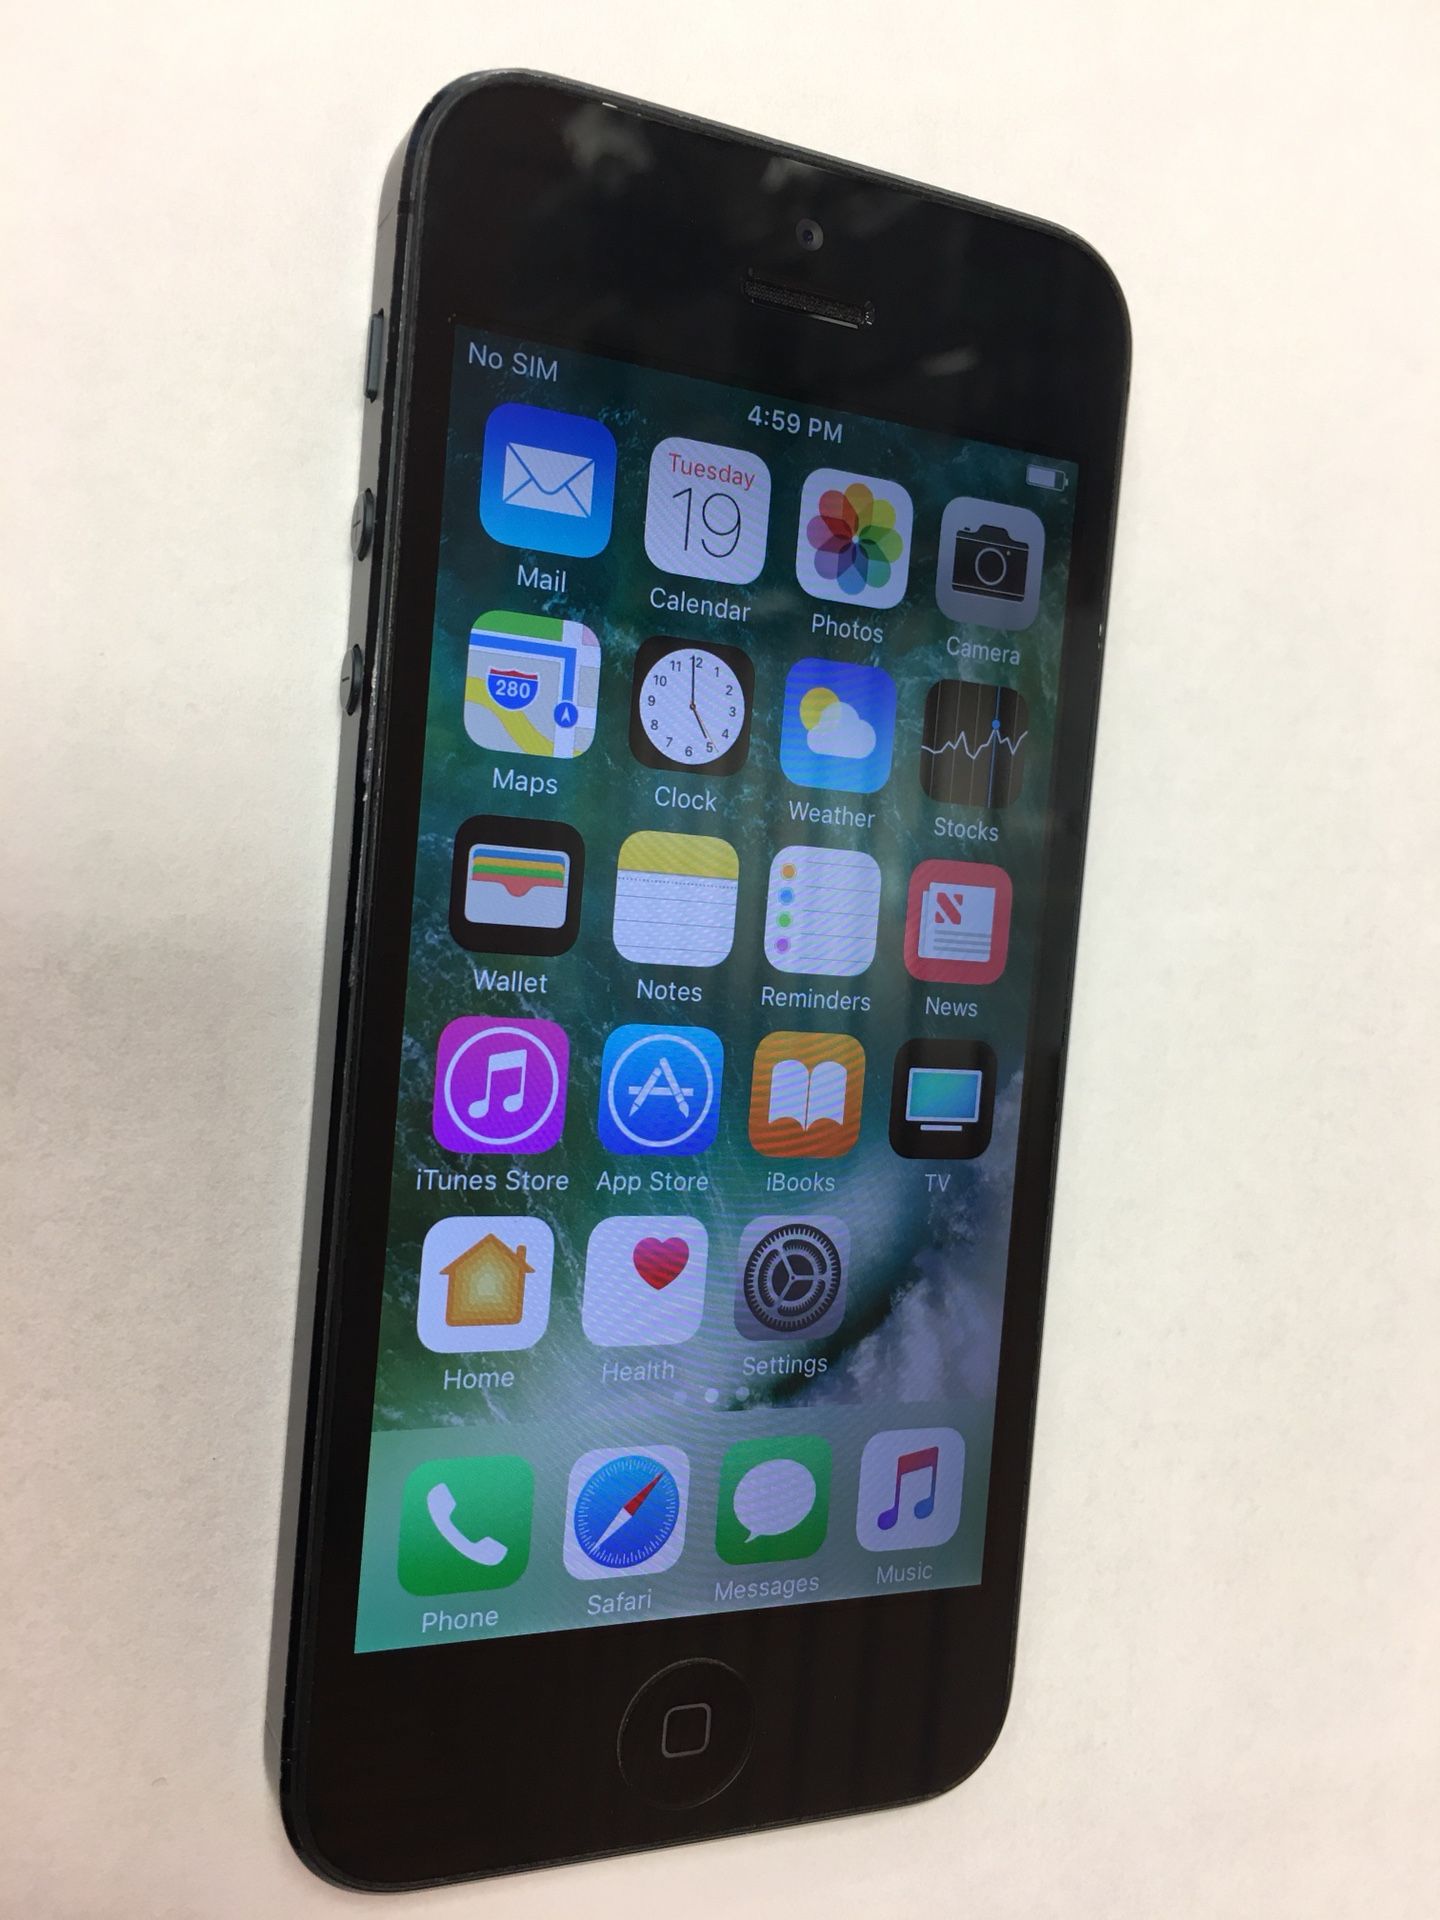 Tmobile IPhone 5 16GB Black Works With T-Mobile and metro pcs. Comes with charger, cable, and headphones. 🙂